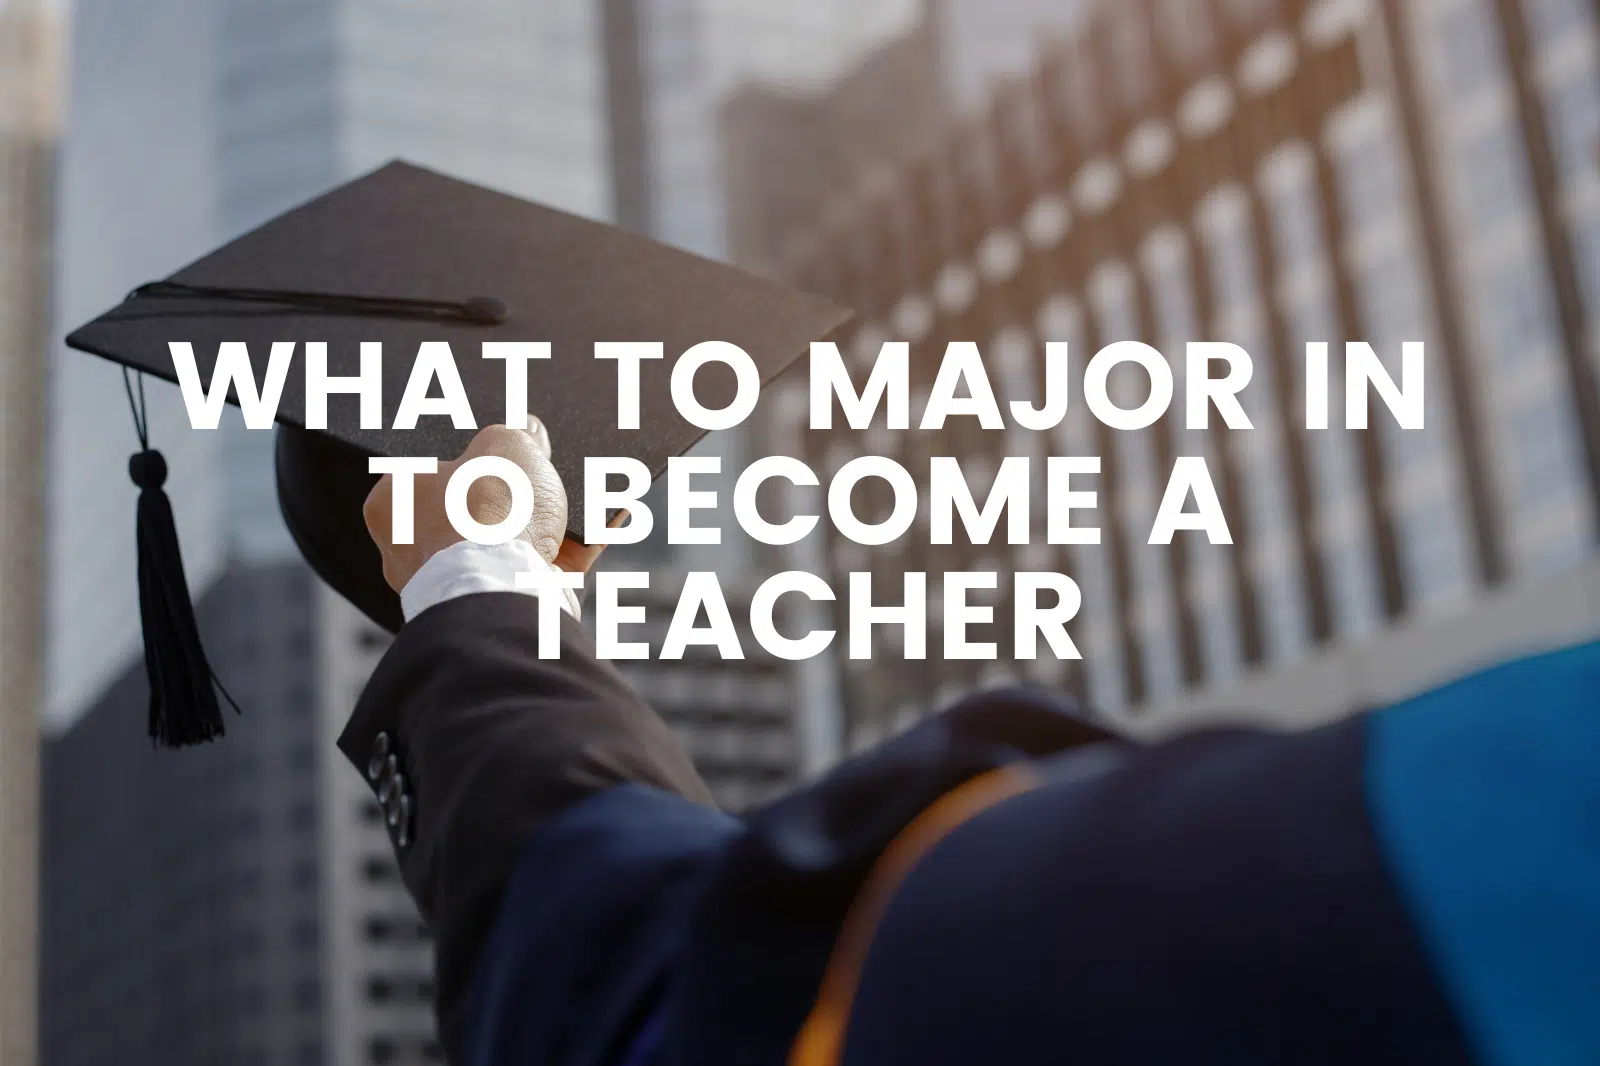 What To Major In To Become A Teacher